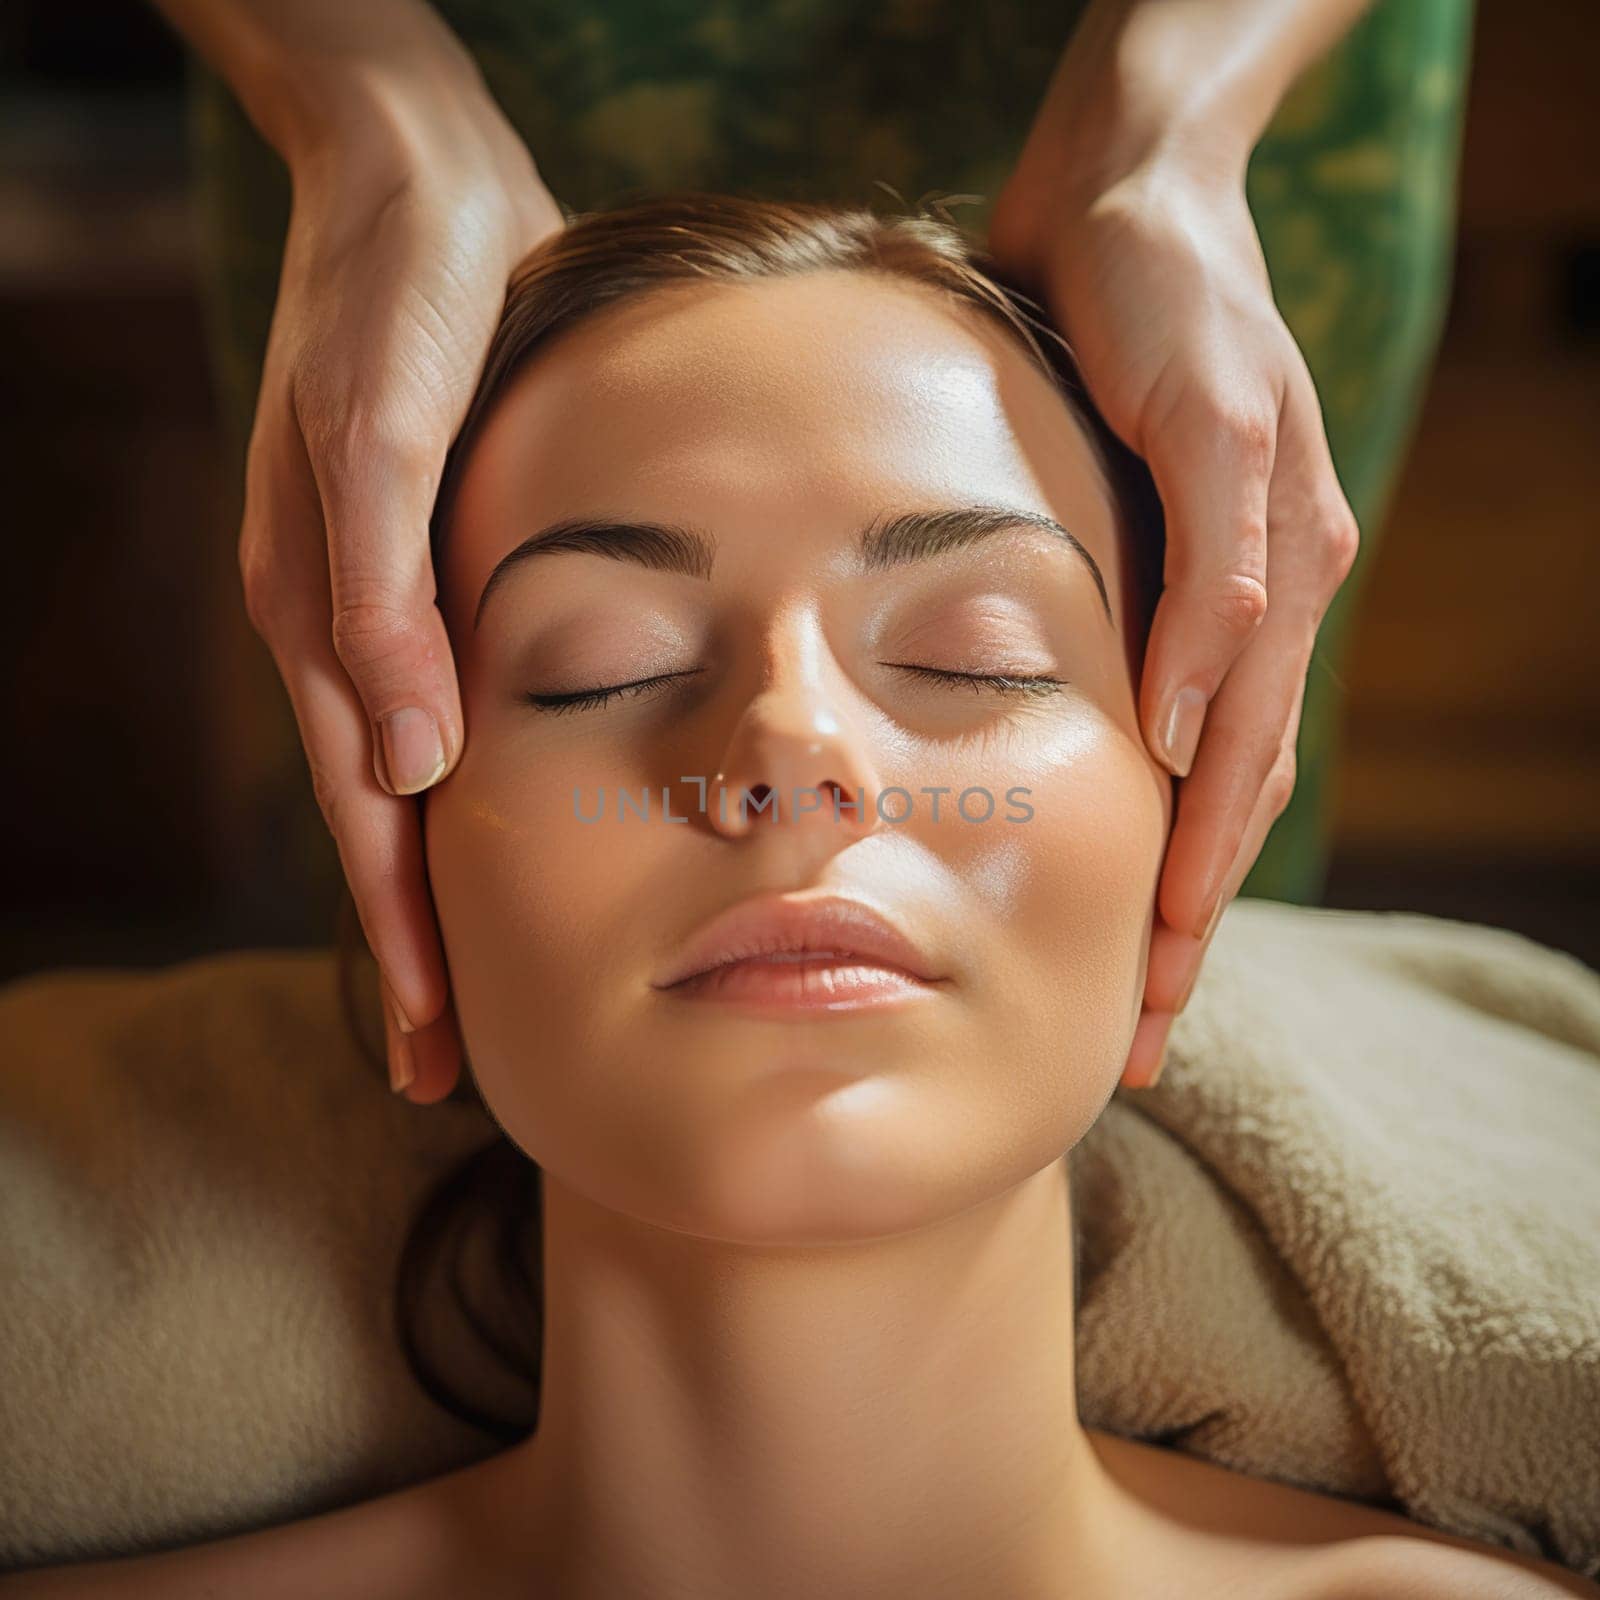 A woman gets a facial massage at a beauty parlor. High quality photo